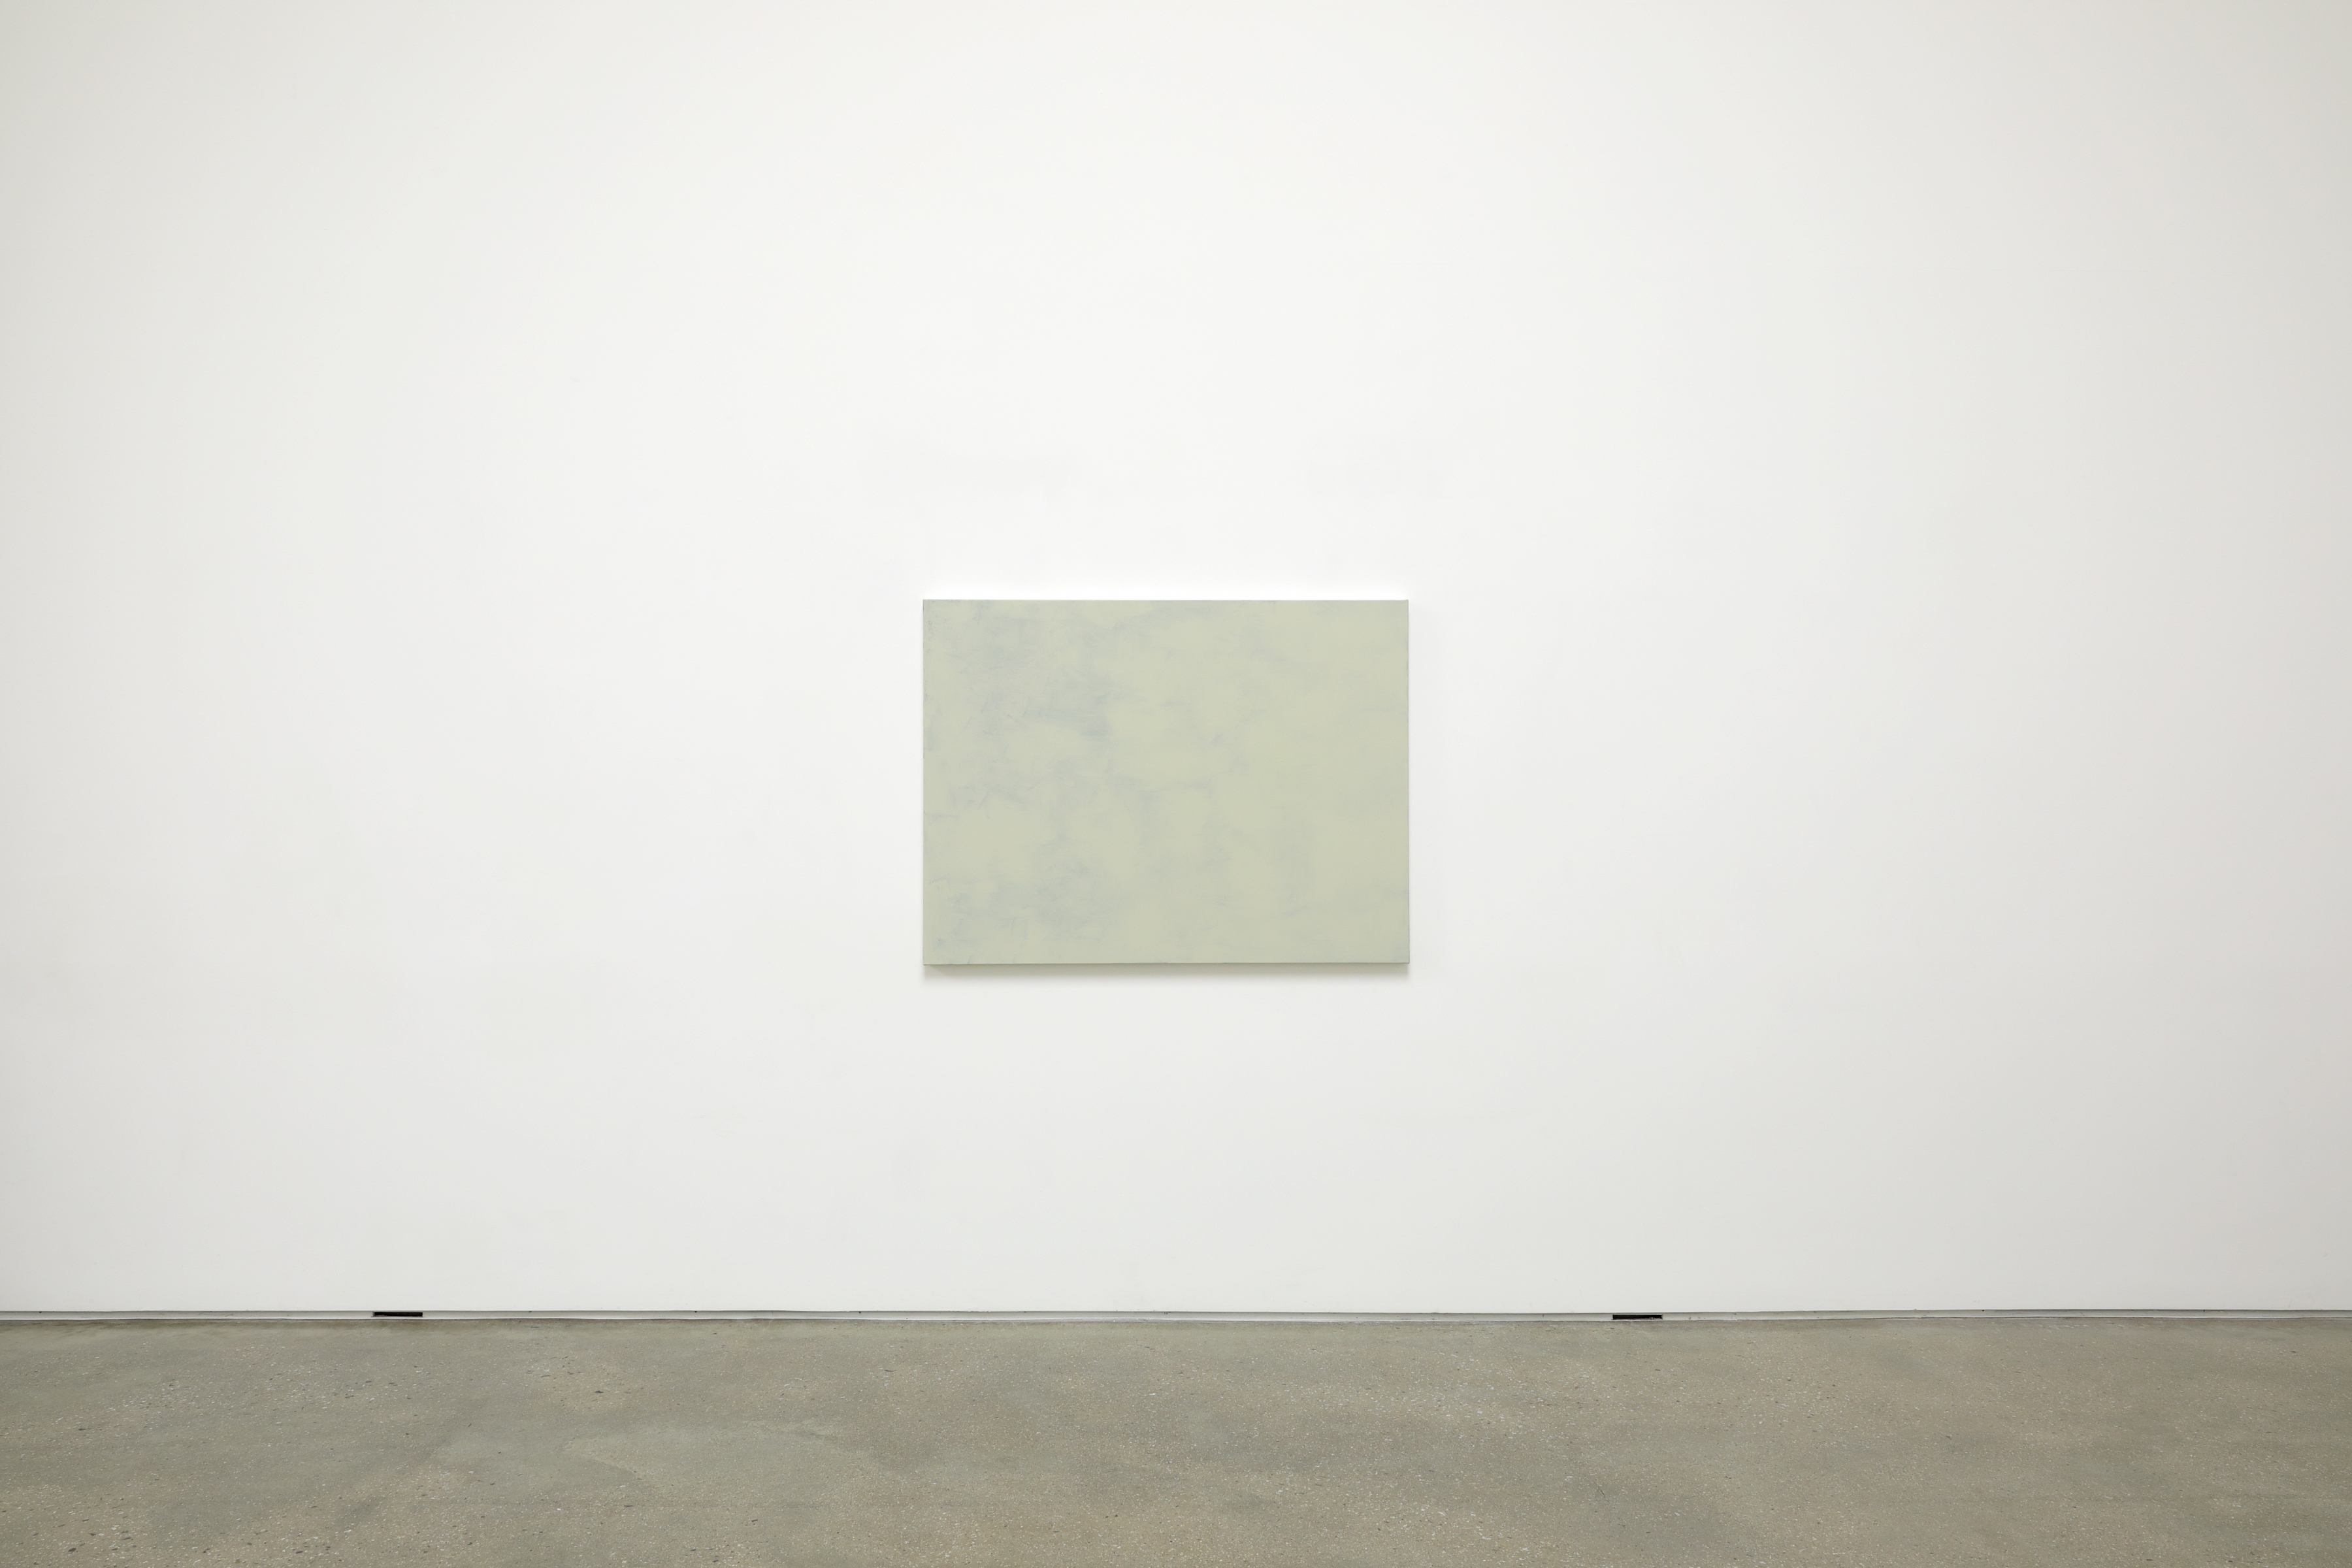 Installation view of&nbsp;Koo Jeong A:2O2O at PKM, Seoul, 2020

Courtesy of the artist &amp; PKM Gallery